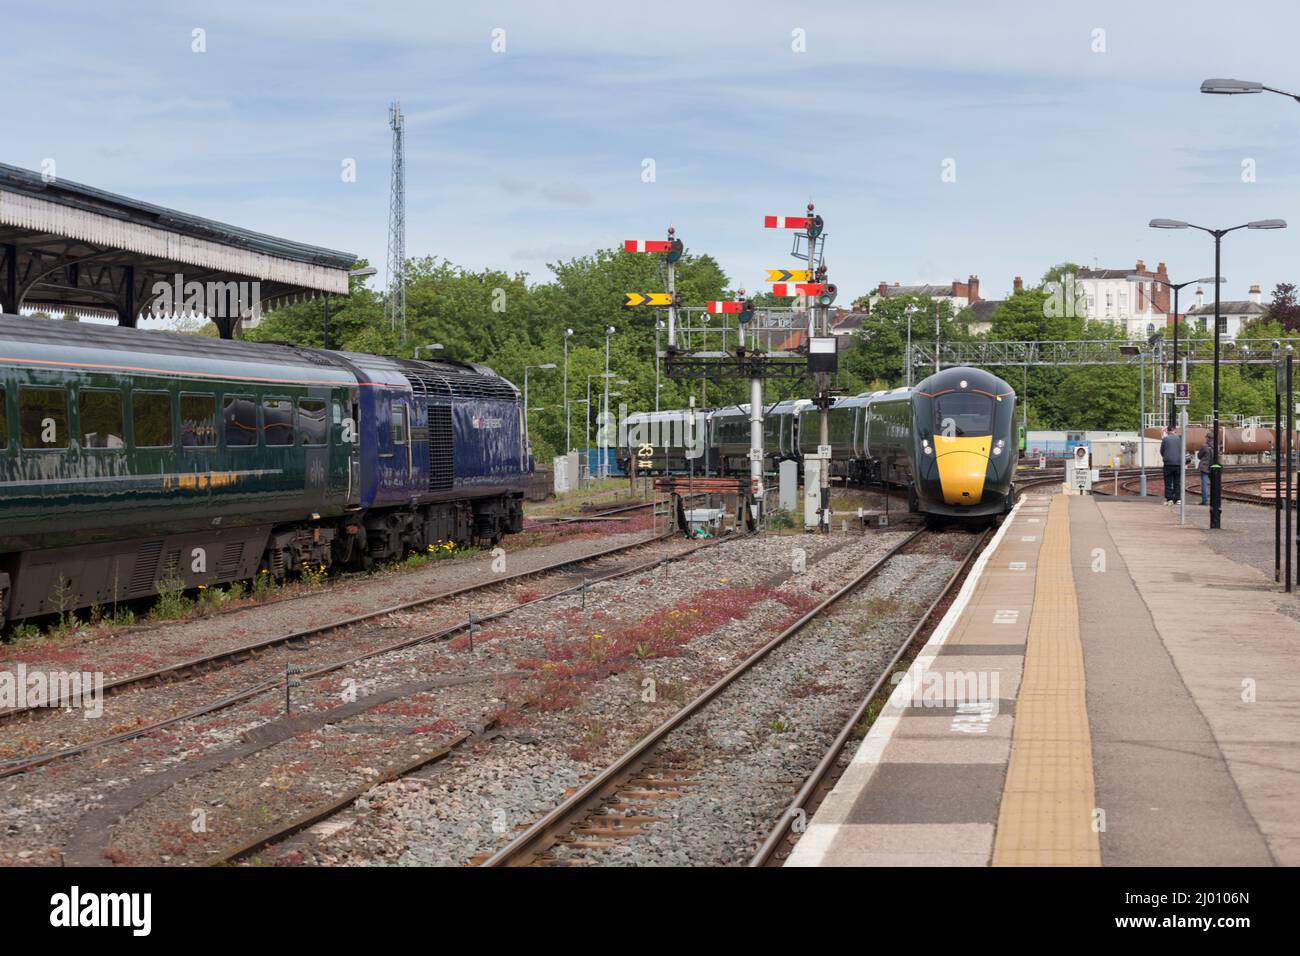 Great Western Railway Hitachi IEP train arriving at Worcester Shrub Hill passing a high speed train ( intercity 125 ) with semaphore signals Stock Photo